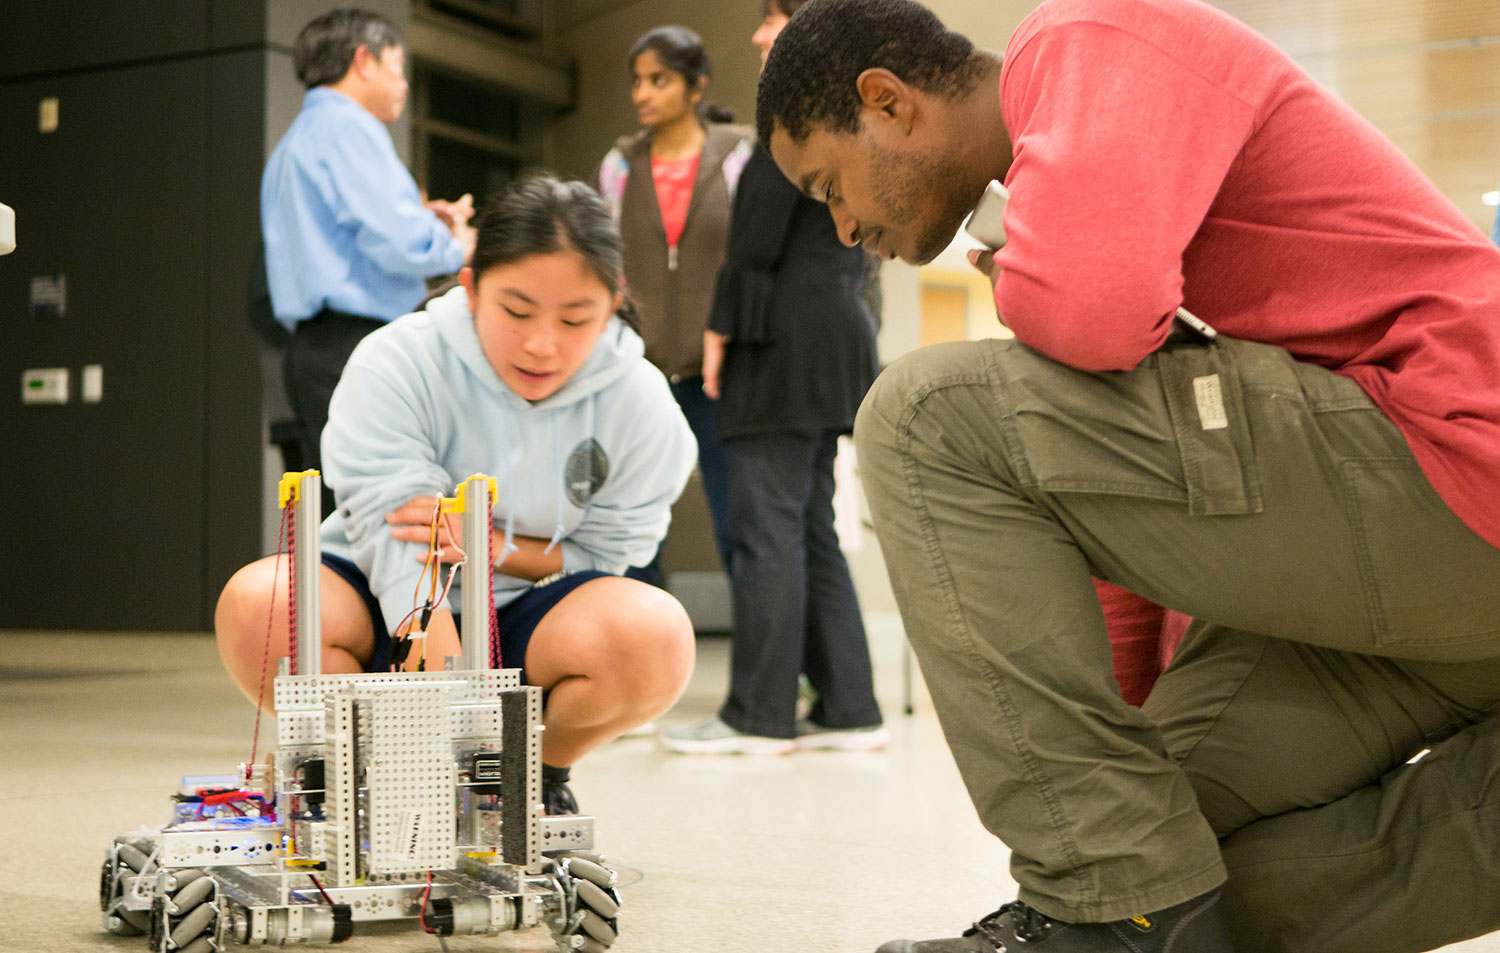 Current and prospective students at Mesa College got hands on experience with robots during a Future in Robotics event.